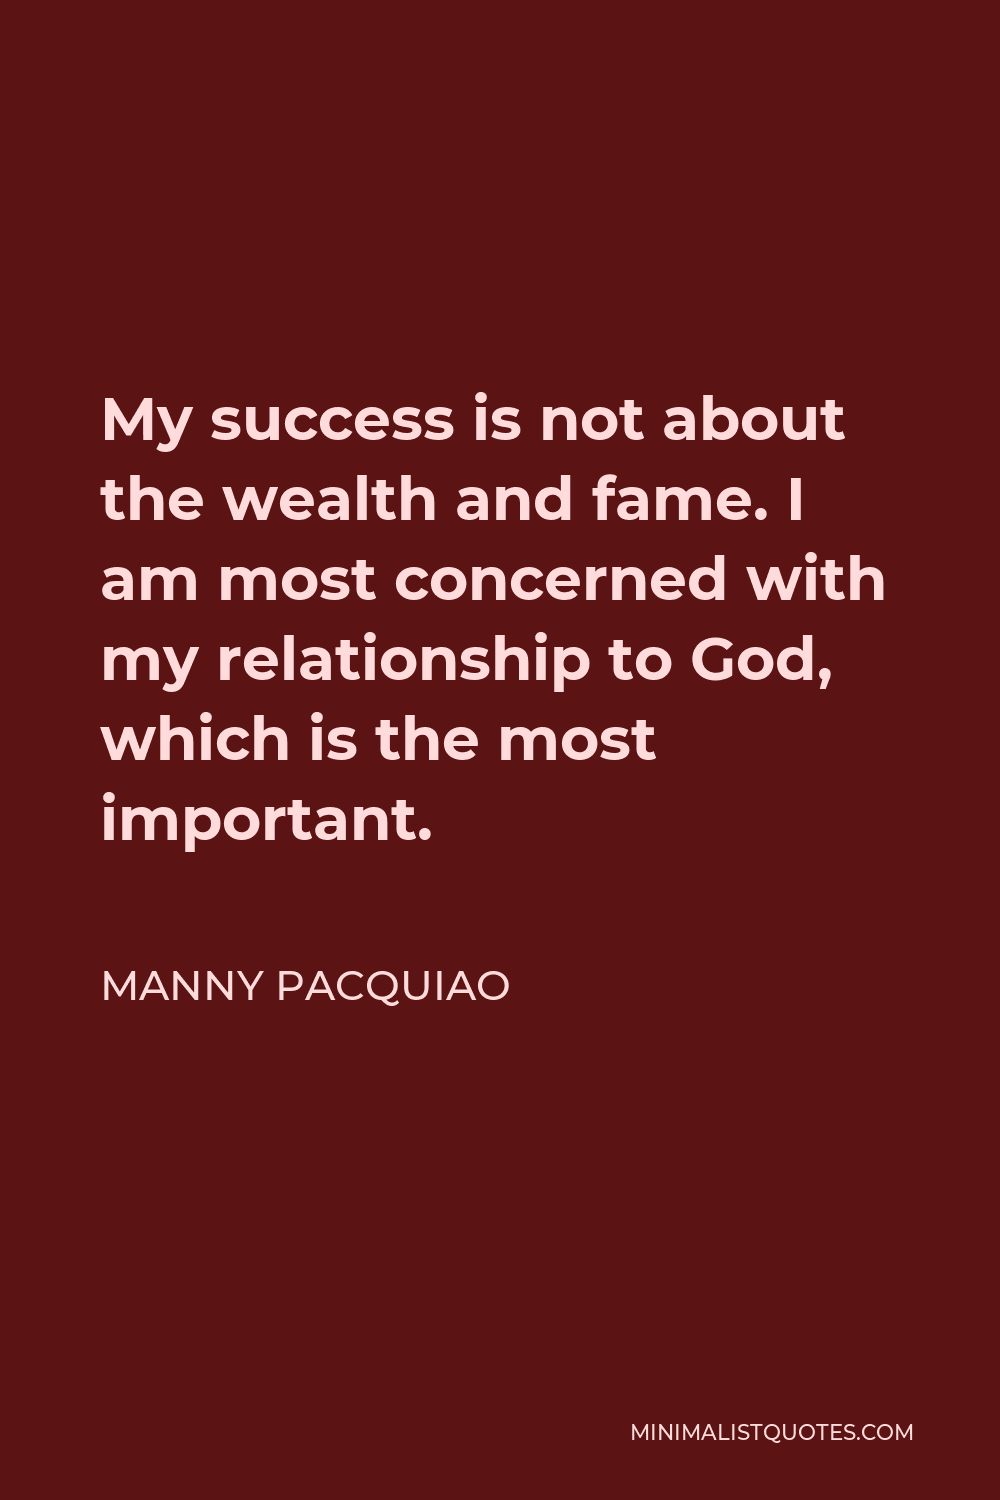 Manny Pacquiao Quote - My success is not about the wealth and fame. I am most concerned with my relationship to God, which is the most important.